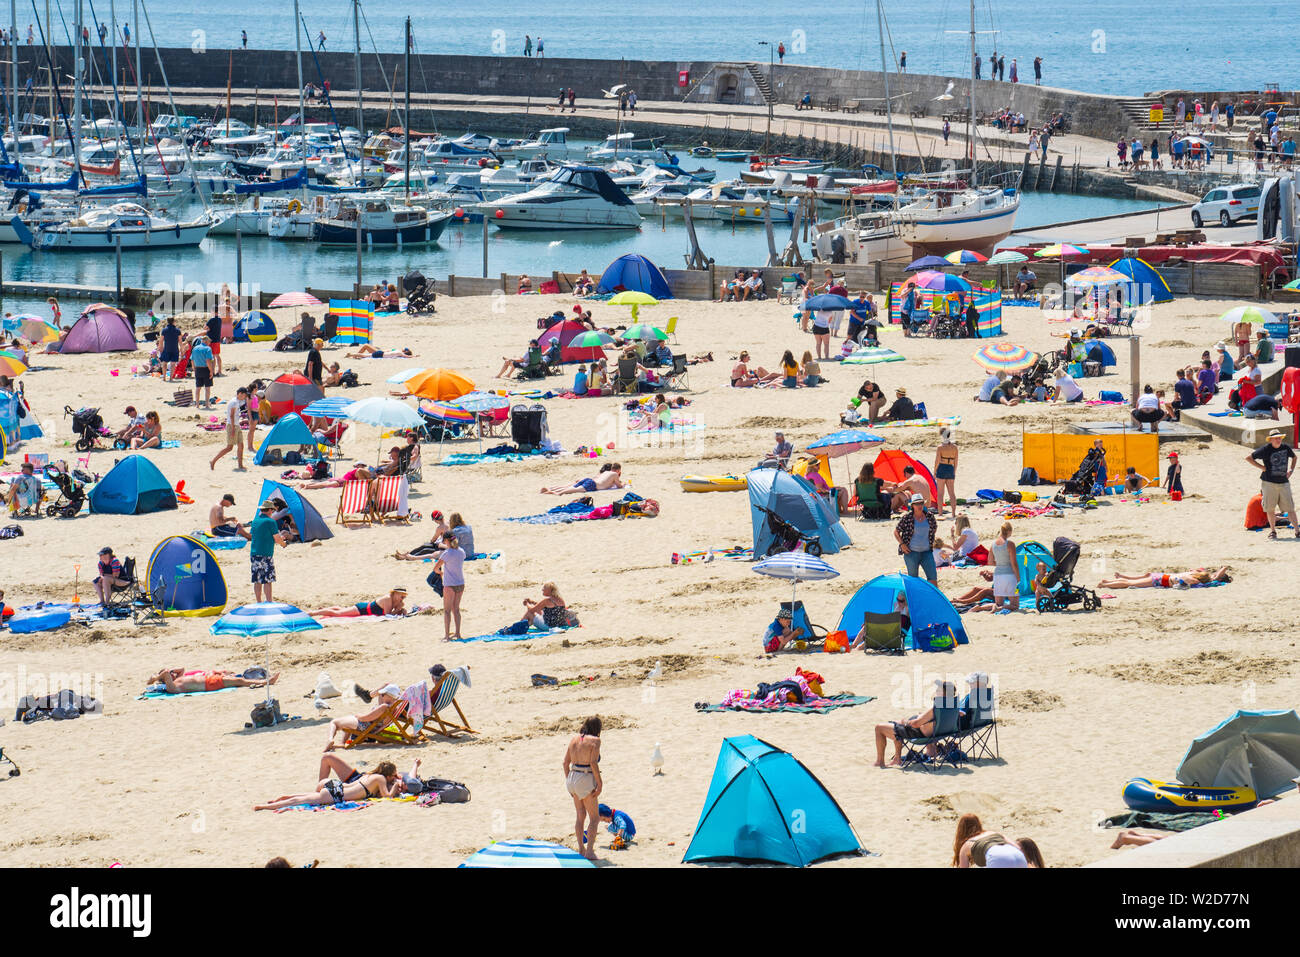 Lyme Regis, Dorset, UK. 8th July 2019. UK Weather: Scorching hot sunshine and blue sky at Lyme Regis. Crowds of visitors flock to the sandy beach to enjoy the hot and sunny weather. Credit: Celia McMahon/Alamy Live News. Stock Photo